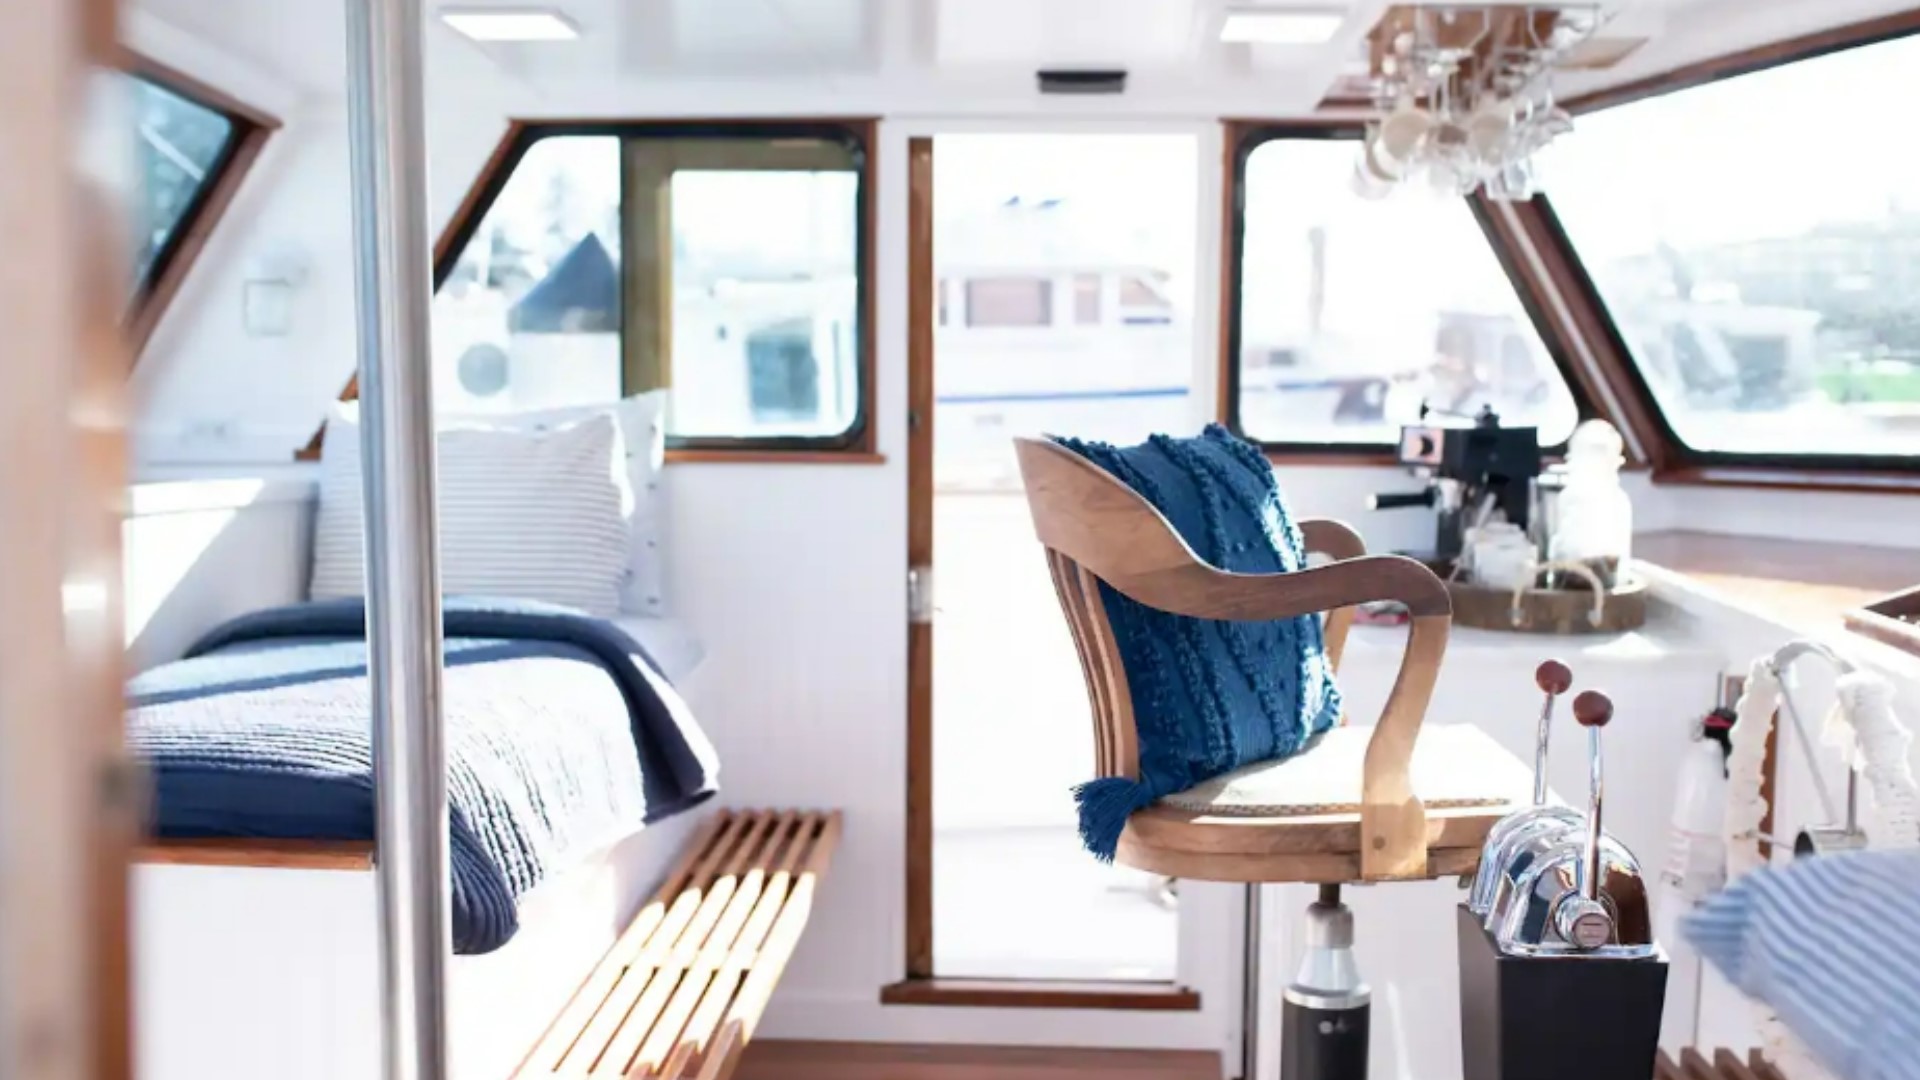 Sleep aboard one of these 5 cute yachts, but don't call this a  'Boatel.' #k5evening